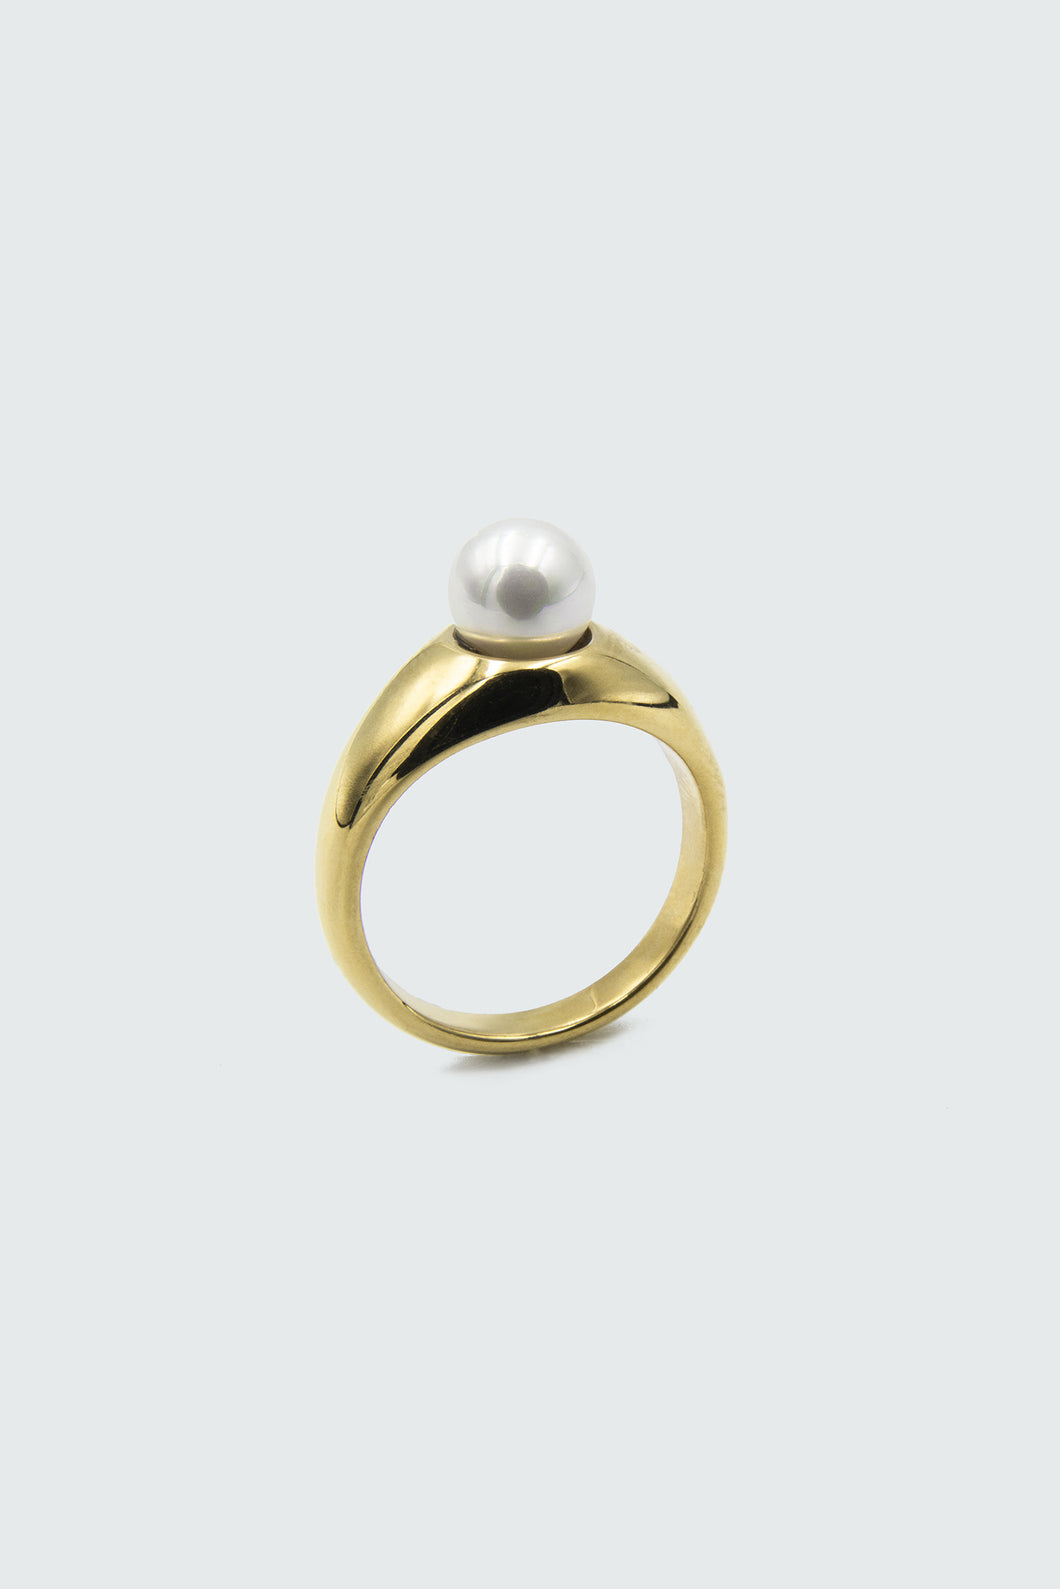 Pearl Top Gold Ring